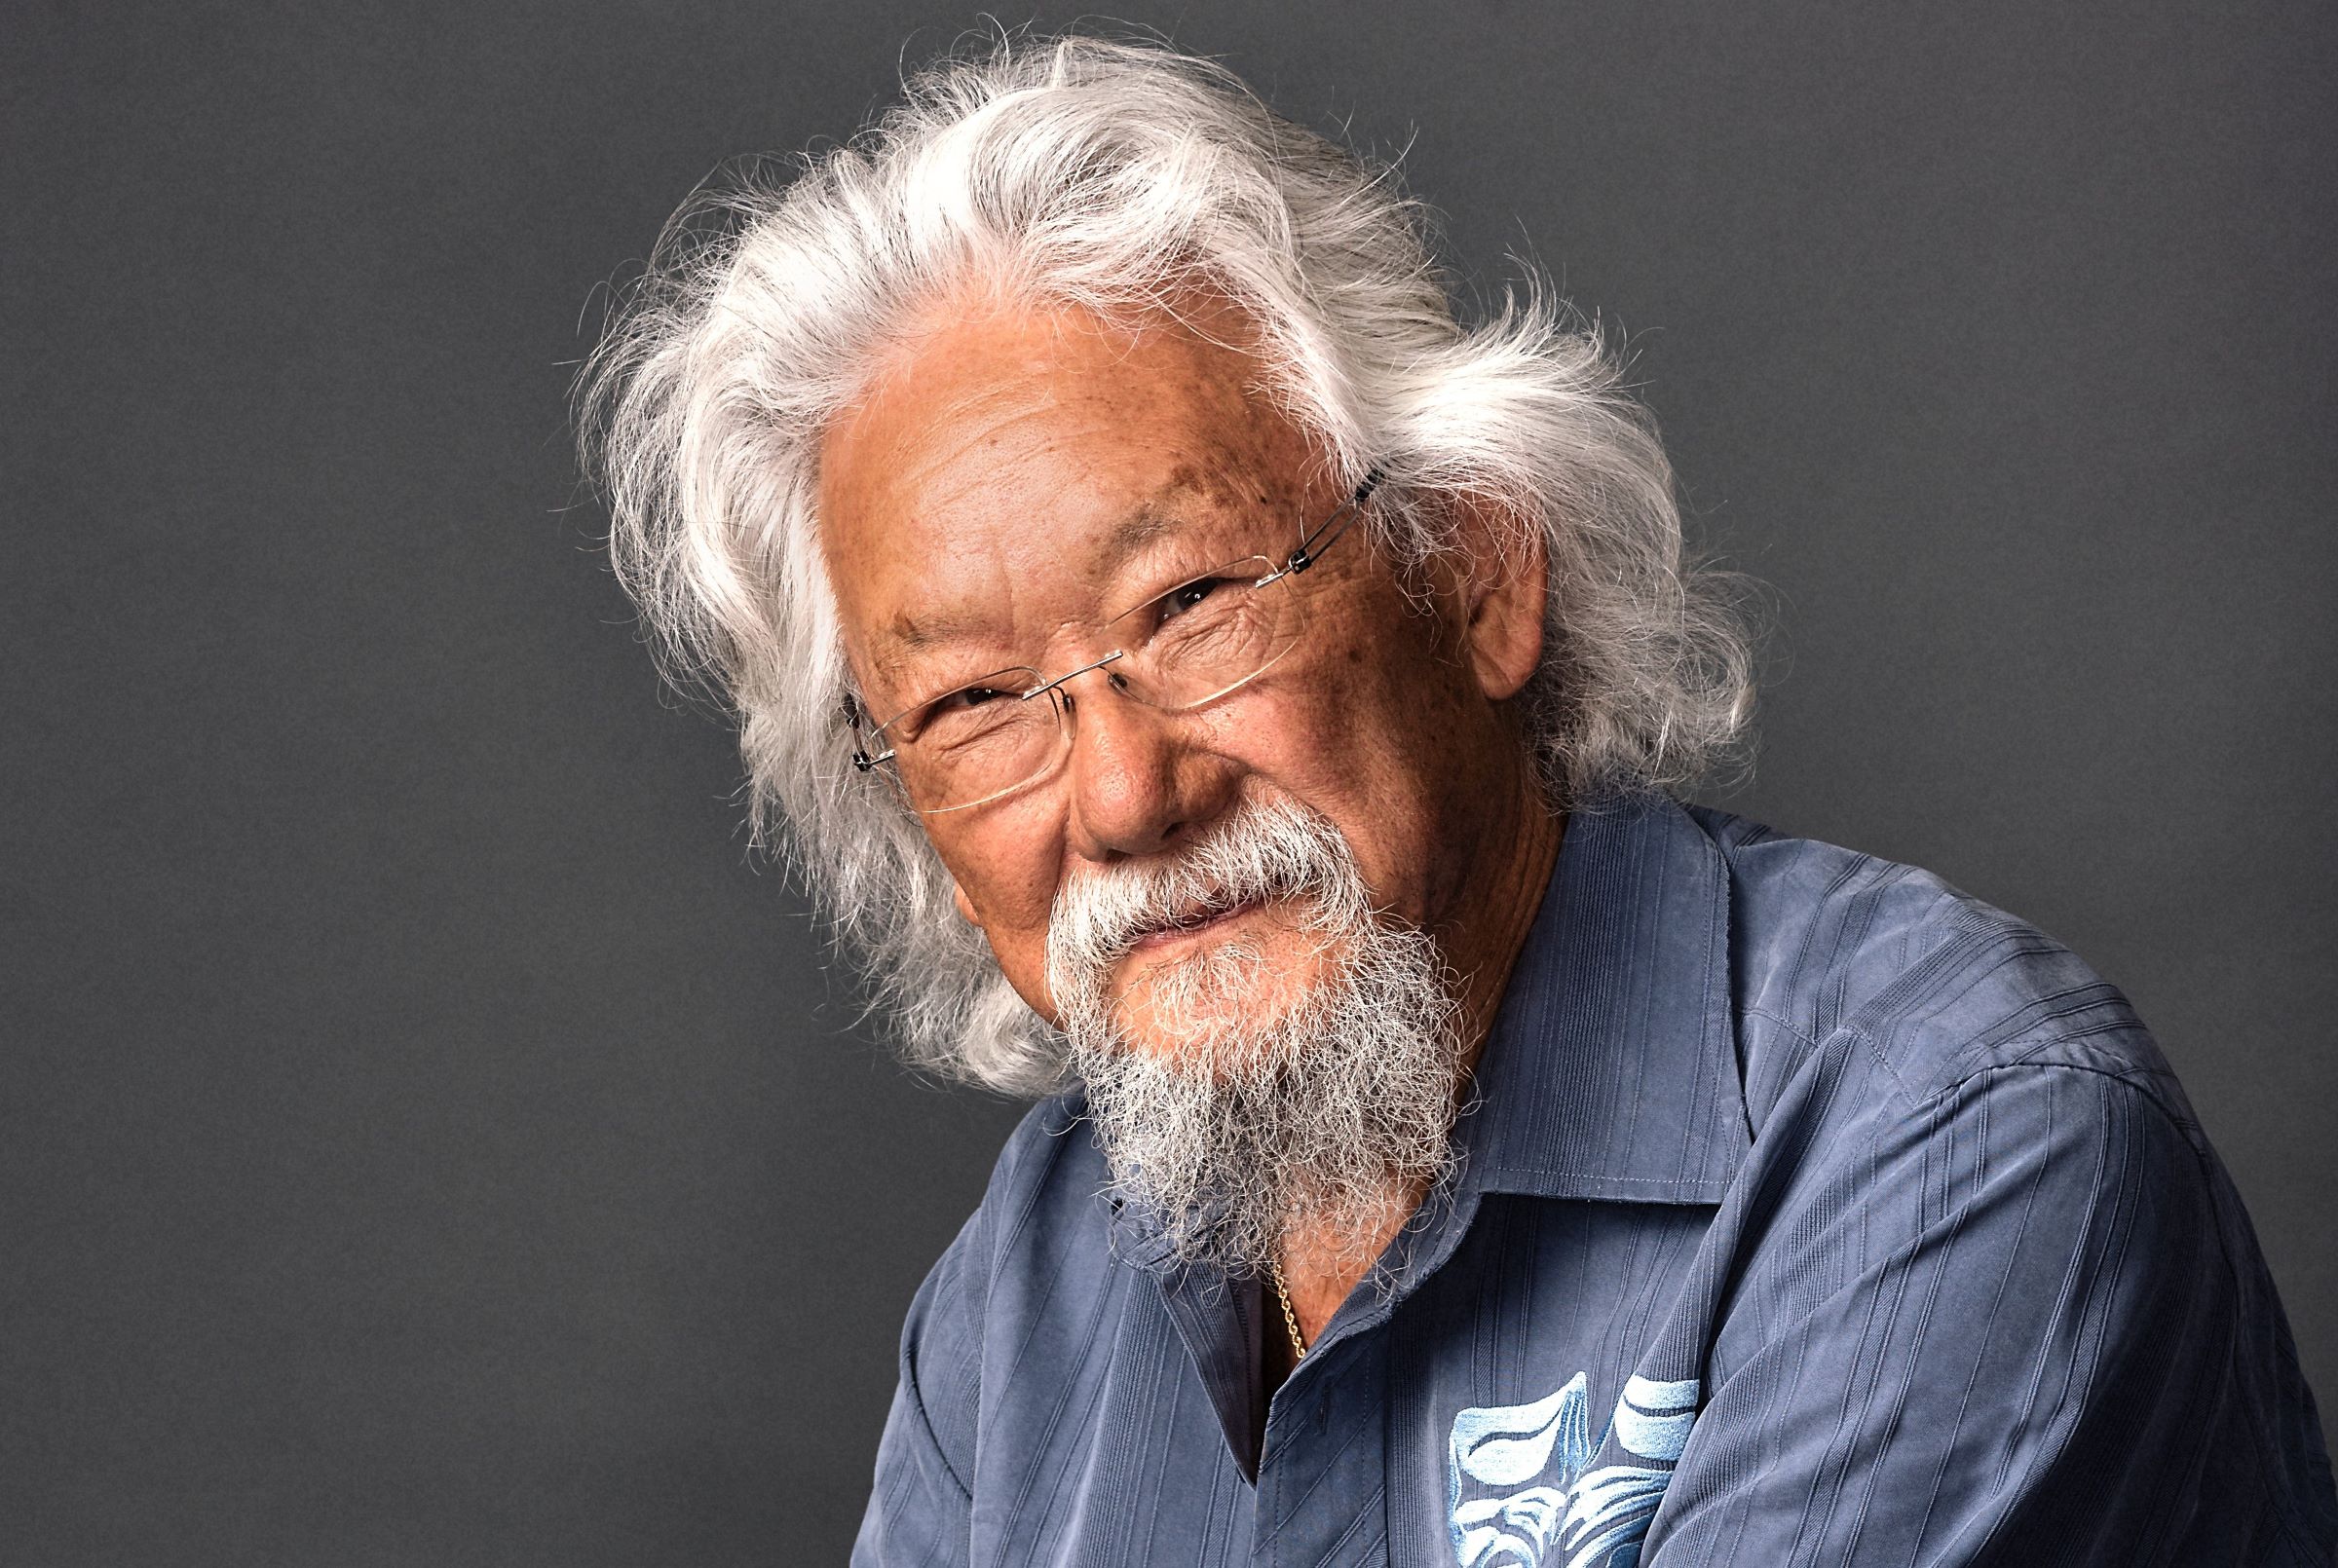 COLUMN:  David Suzuki reflects on science and its effects on our lives over his lifetime